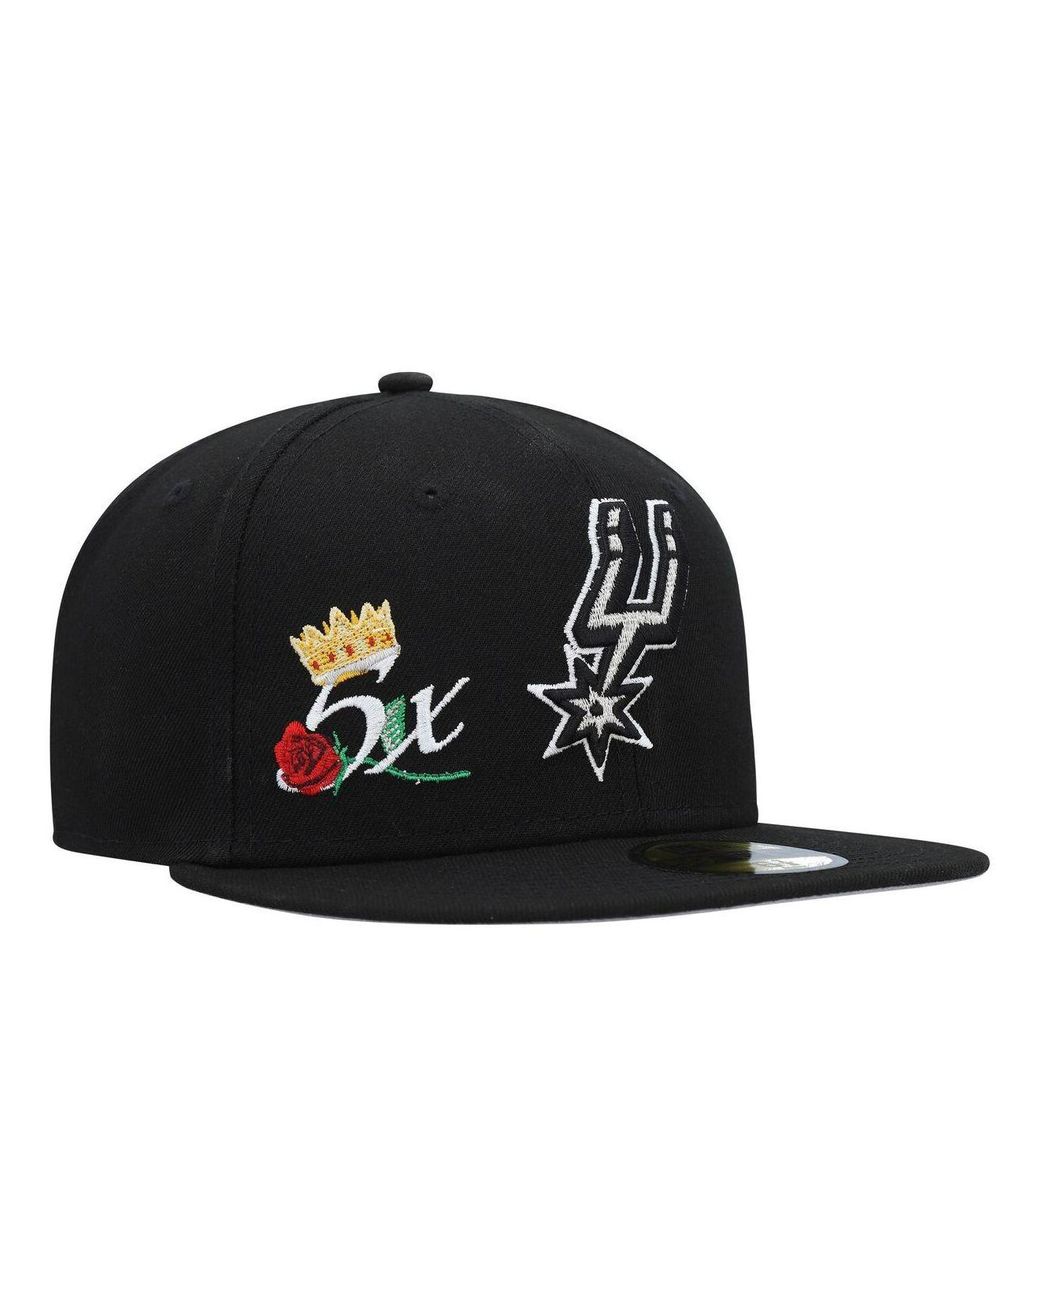 KTZ Black San Antonio Spurs Crown Champs 59fifty Fitted Hat for Men